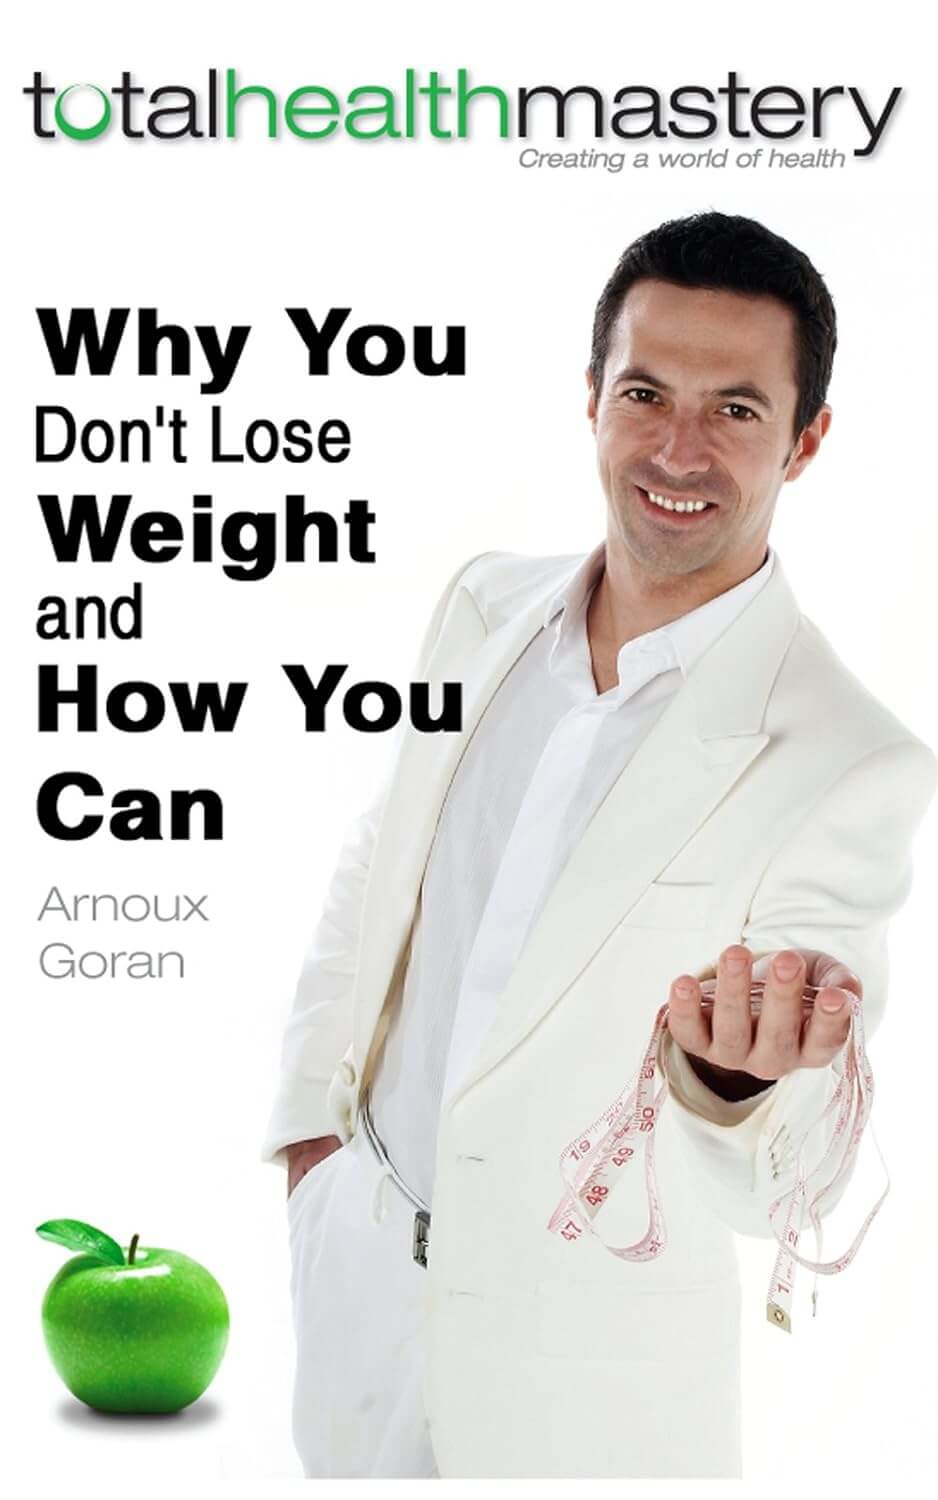 Why You Don't Lose Weight and How You Can